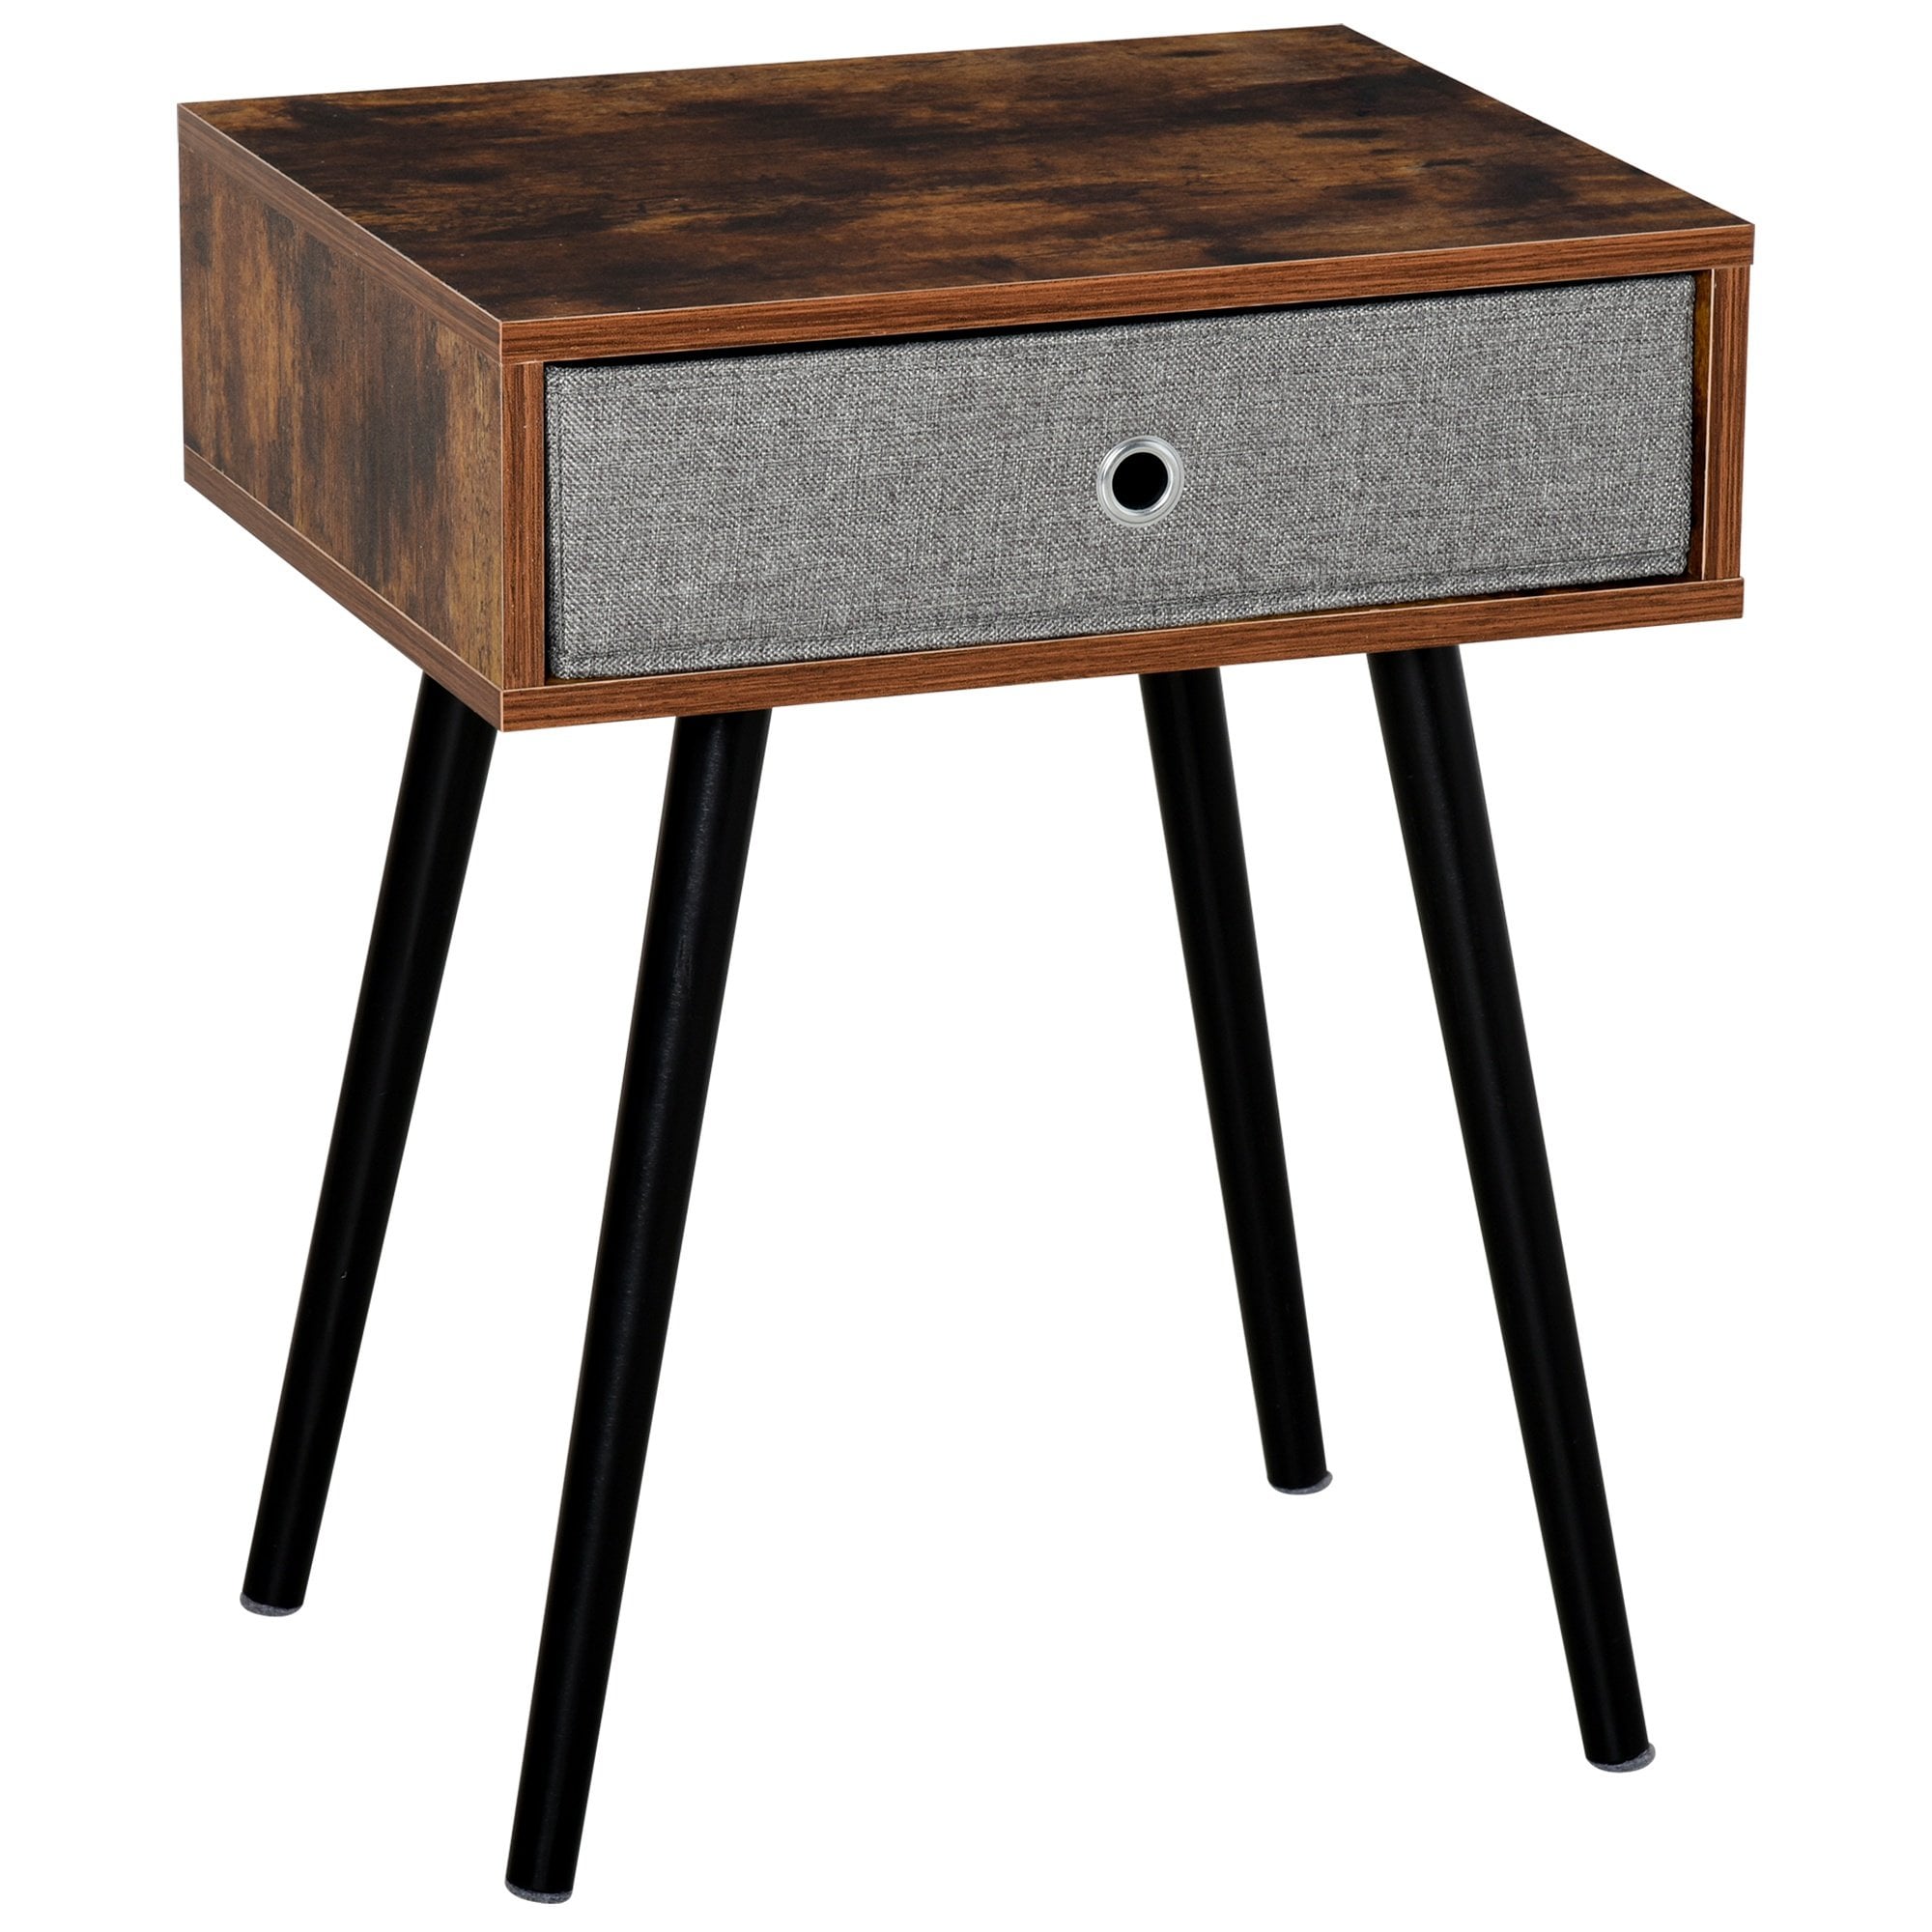 Side Table - Nightstand - End Table with Removable Fabric Drawer - Retro Style Accent Furniture with Wooden Legs - Rustic Brown and Black Chic Legs -